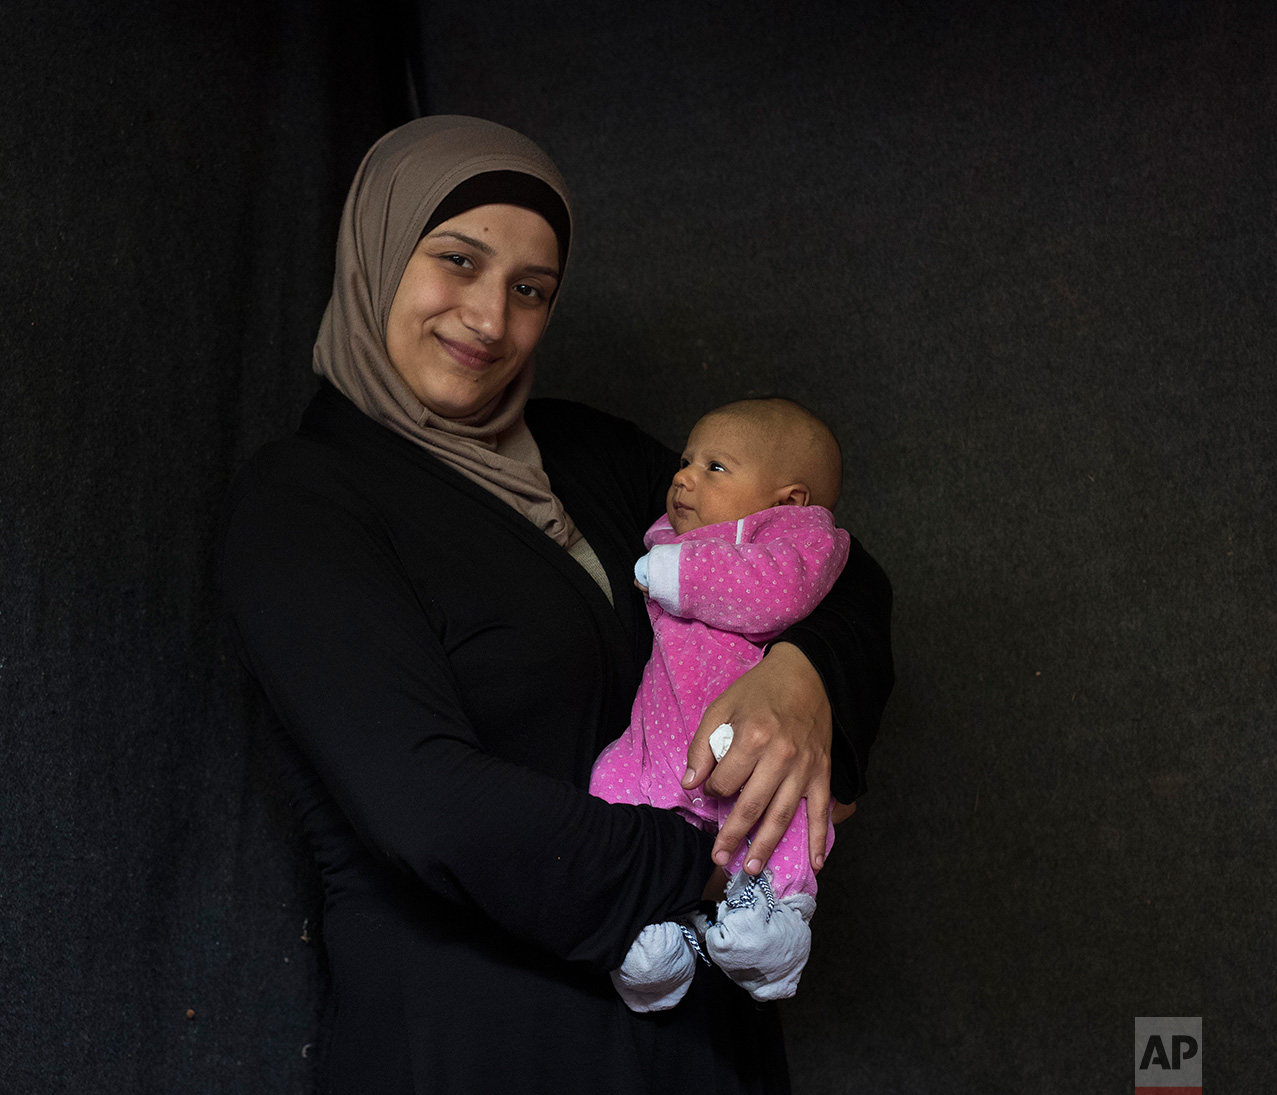  In this Wednesday Oct.12, 2016 photo 28-year-old Hala Baroud, a Syrian mother from Latakia, poses with her baby girl Farah in a tent made of blankets given by the UNCHR at the Ritsona refugee camp in Greece. Hala is one of the dozens of refugee wome